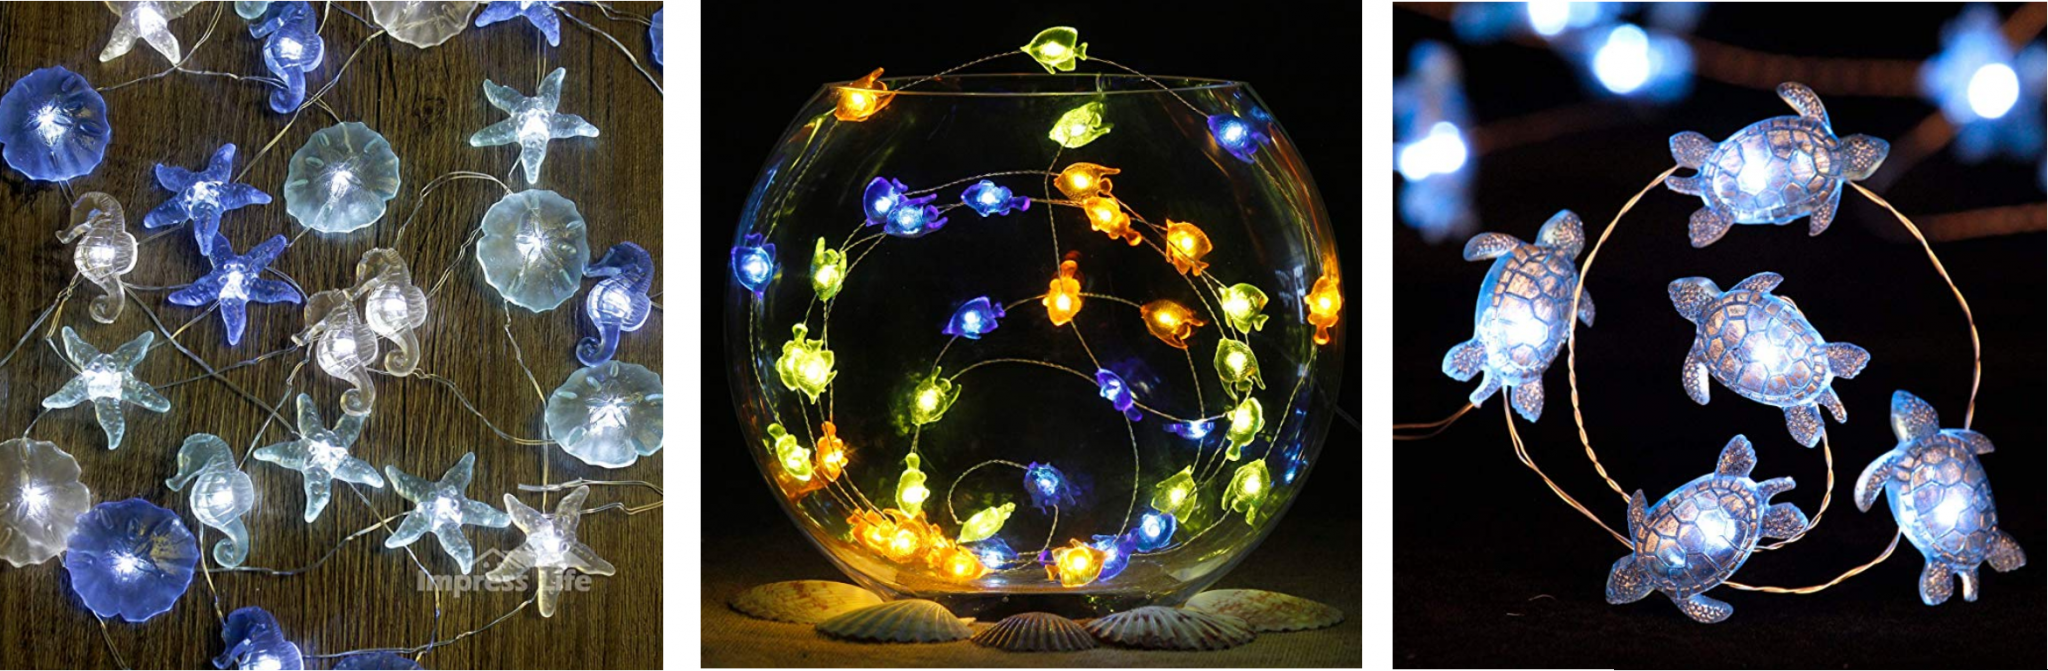 Three examples of ocean-themed string lights, because what is an eco-friendly office without a turtle, fish or seahorse decor